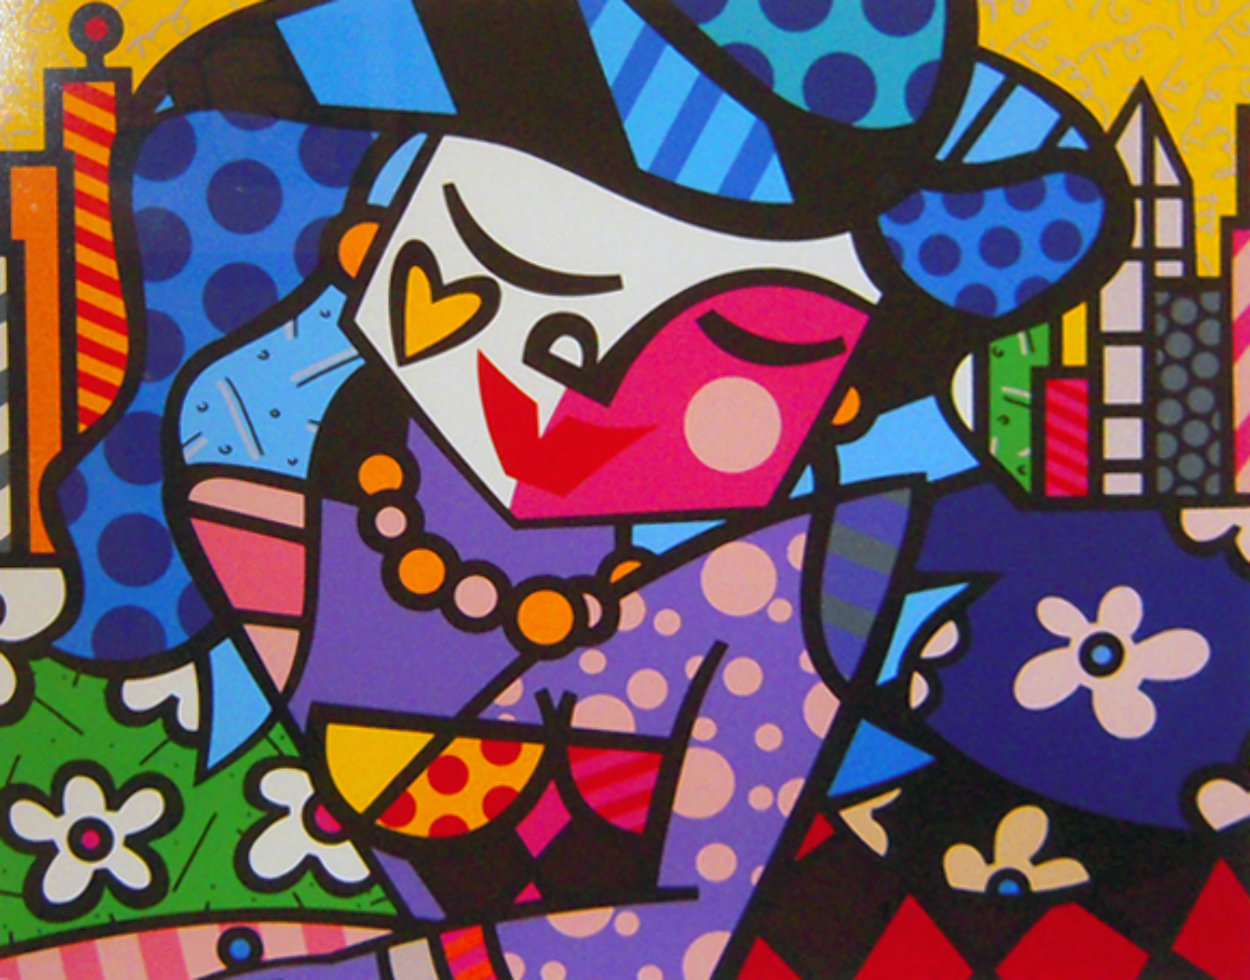 Uptown 2003 Limited Edition Print by Romero Britto